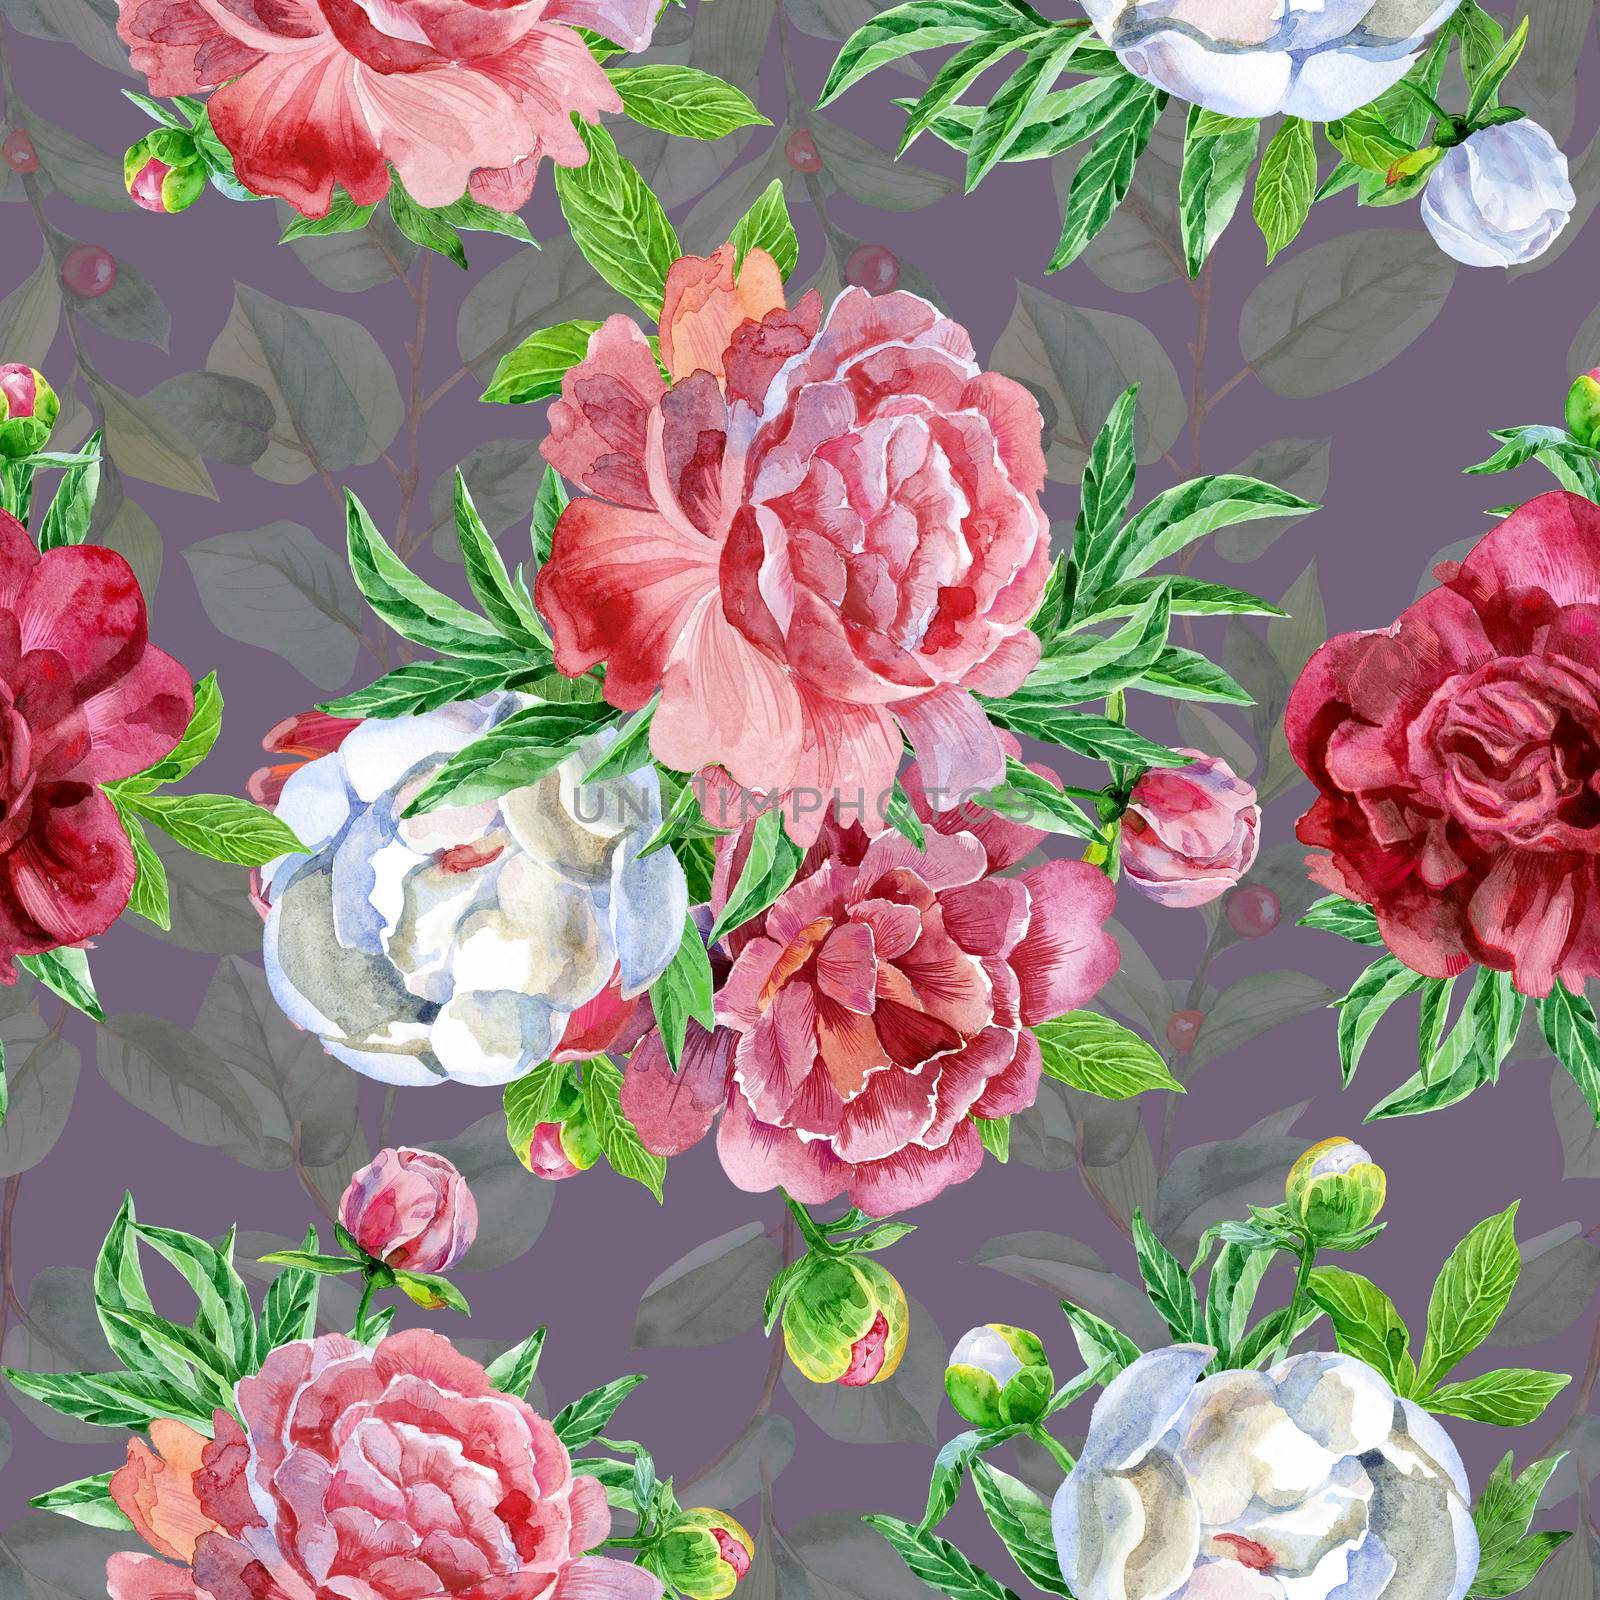 Seamless pattern with peonies flowers. Modern floral pattern for packaging, textile, wallpaper, print, gift wrap, greeting or wedding background.